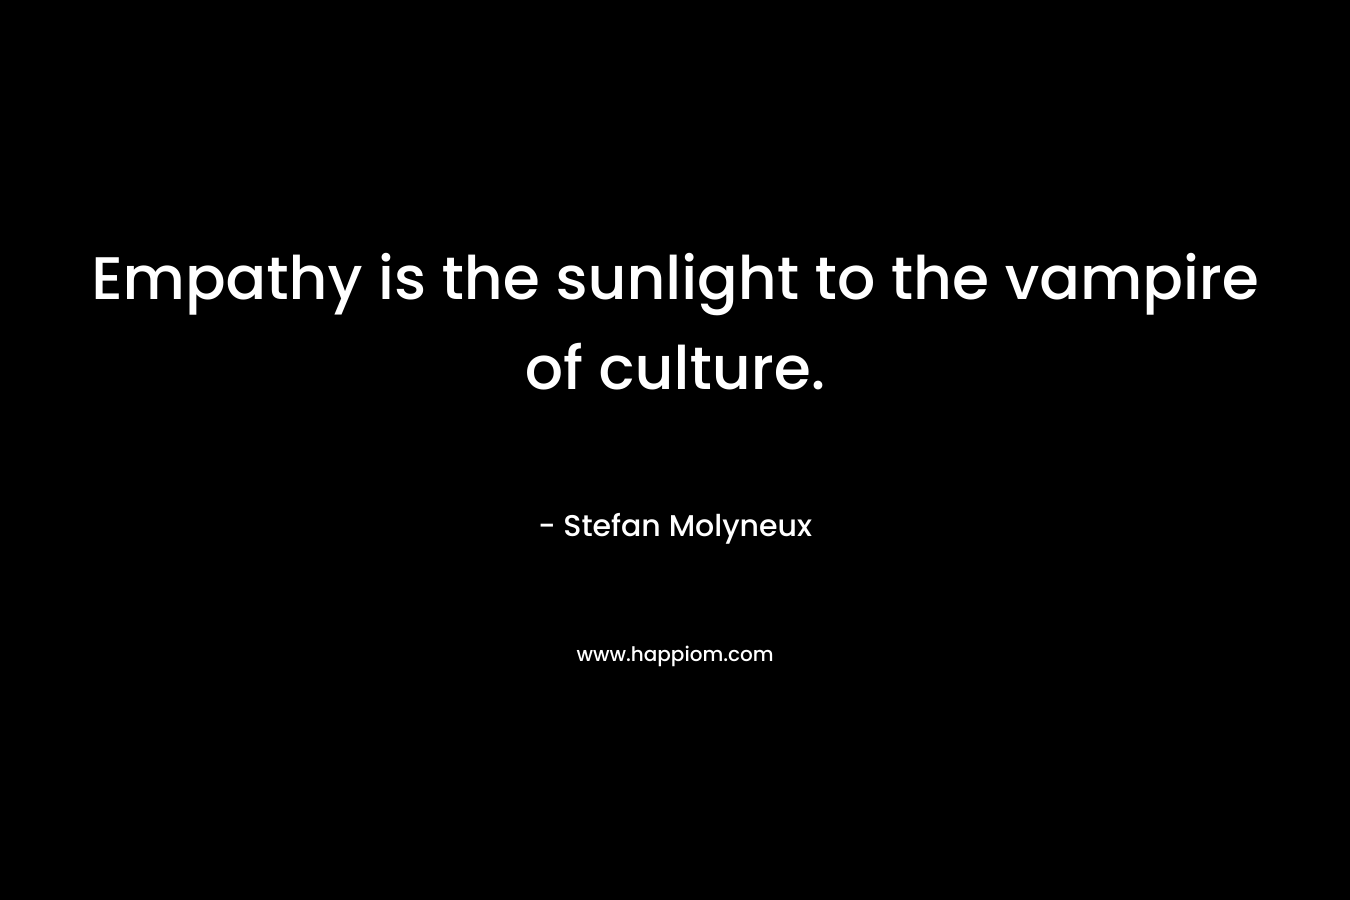 Empathy is the sunlight to the vampire of culture.